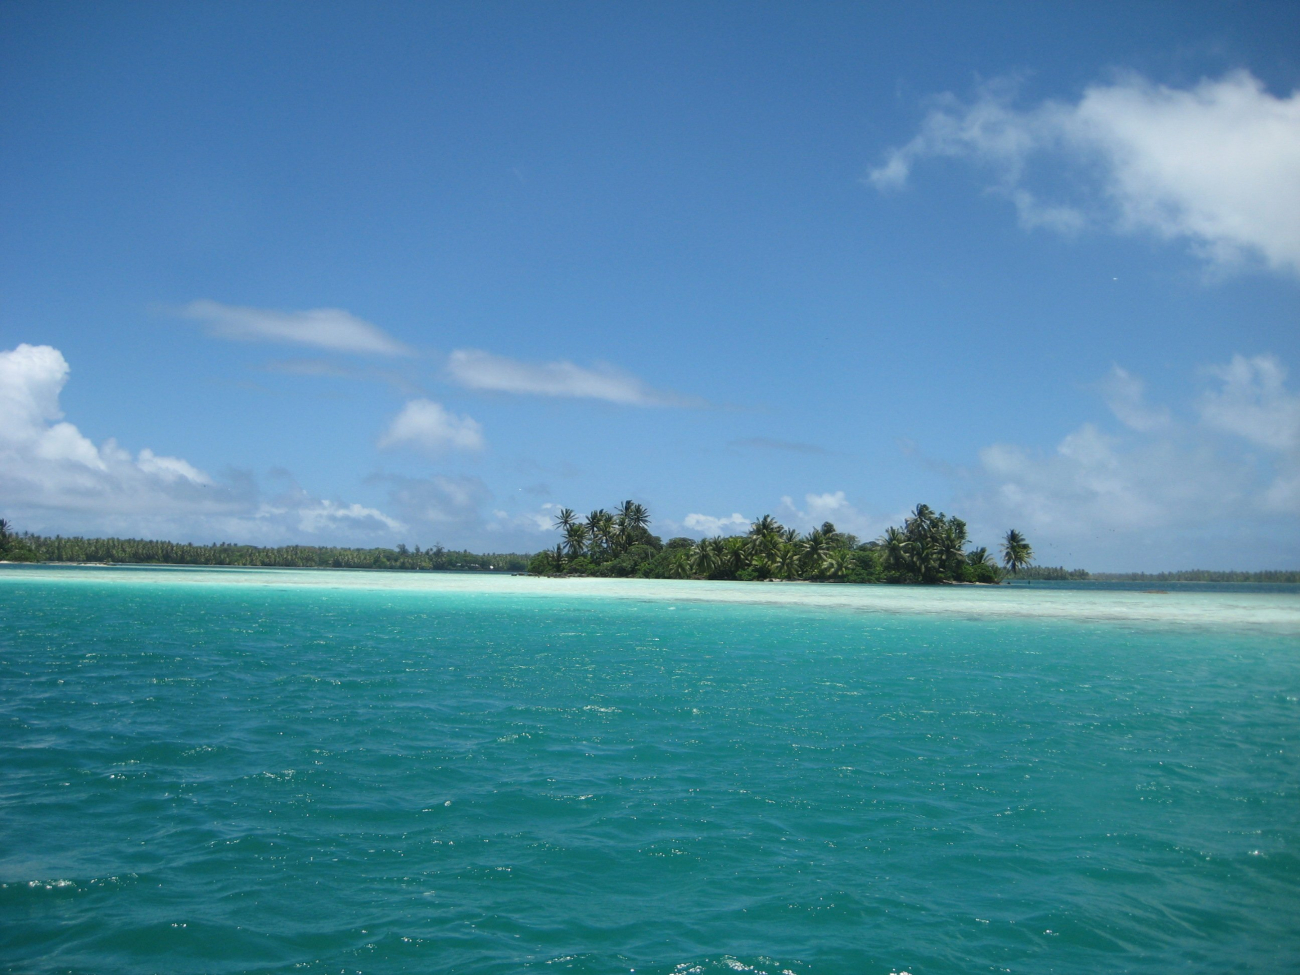 In the shallow aquamarine waters of the lagoon at Palmyra Island